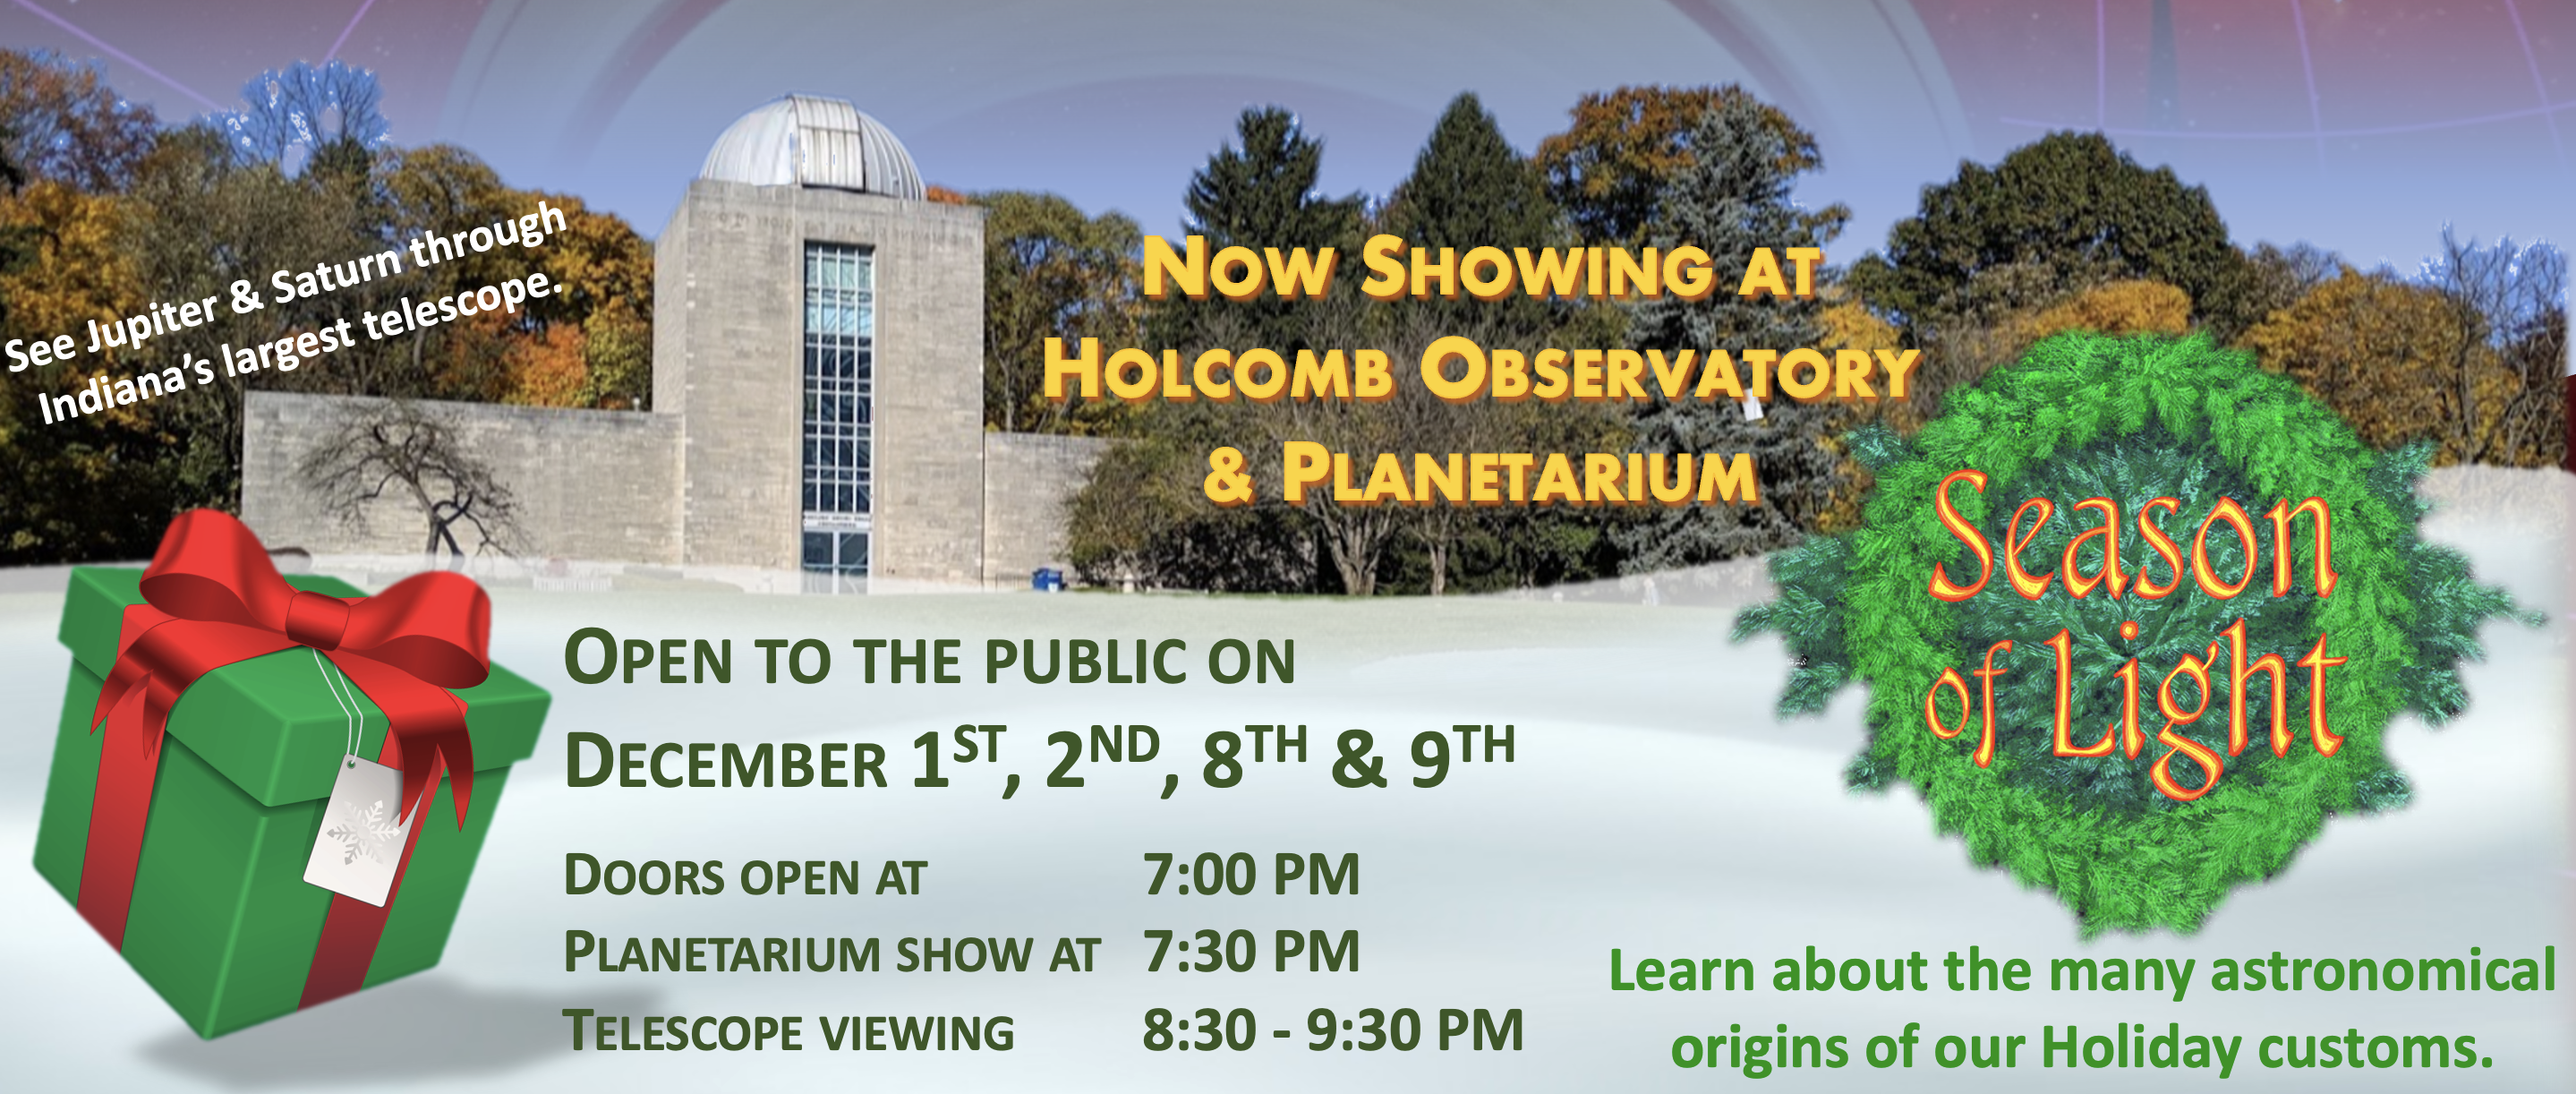 Now Showing Season of Light. Learn about the many astronomical origins of our Holiday customs. Open to the public on December 1st, 2nd, 8th & 9th Doors open at 7:00 PM Planetarium show at 7:30 PM Telescope viewing 8:30 - 9:30 PM